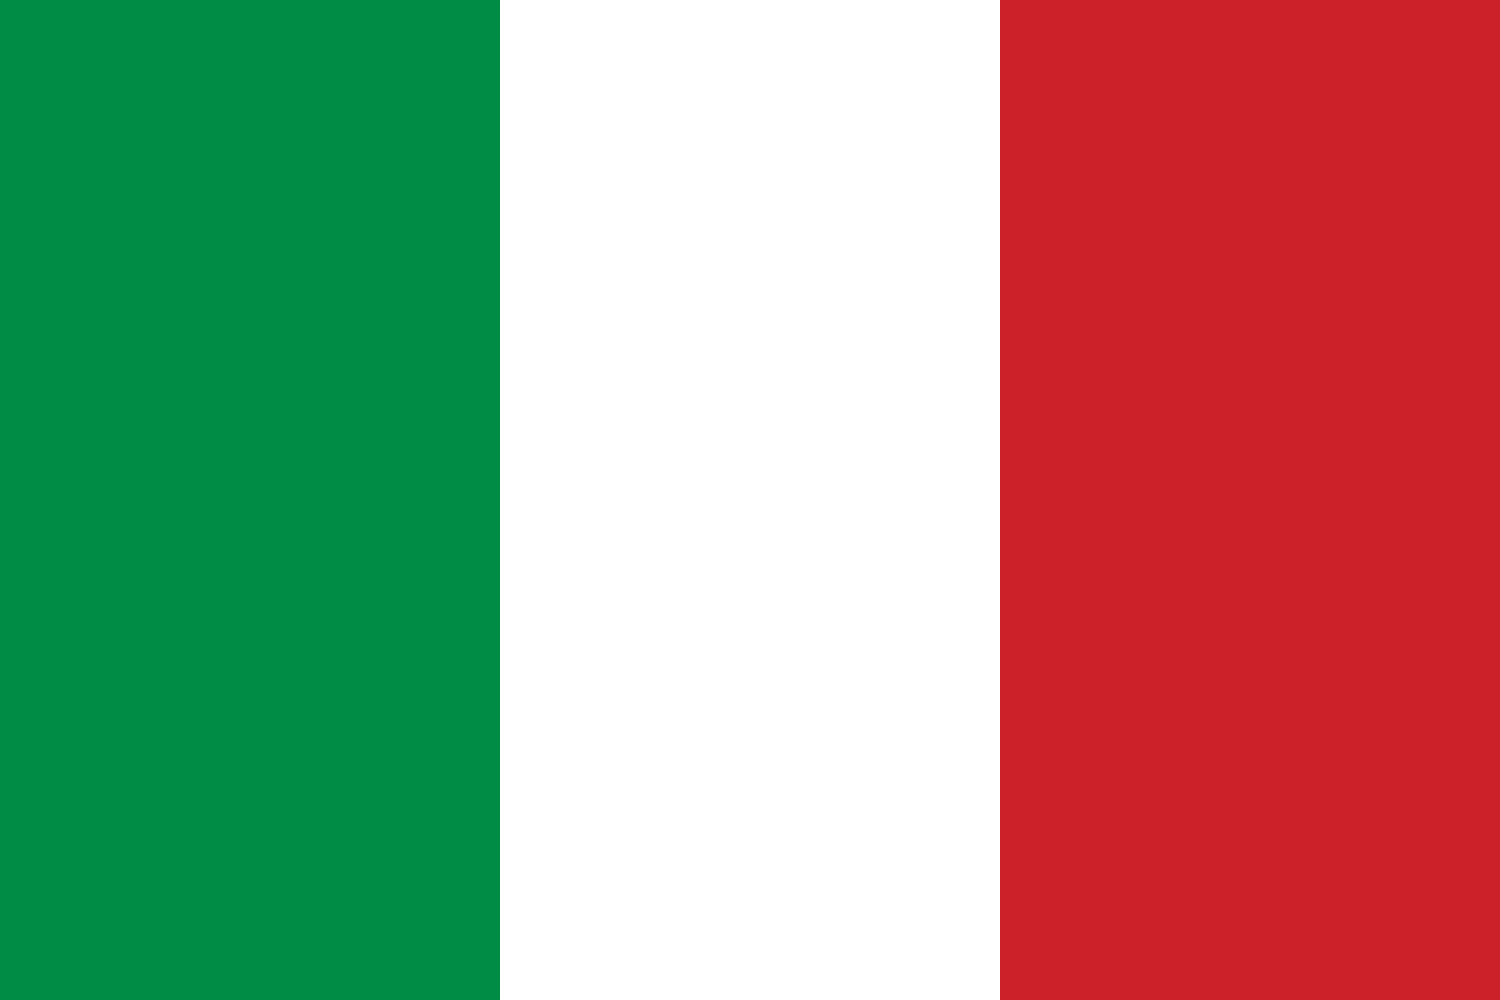 Download File:Flag of Italy (Pantone).svg - Wikimedia Commons